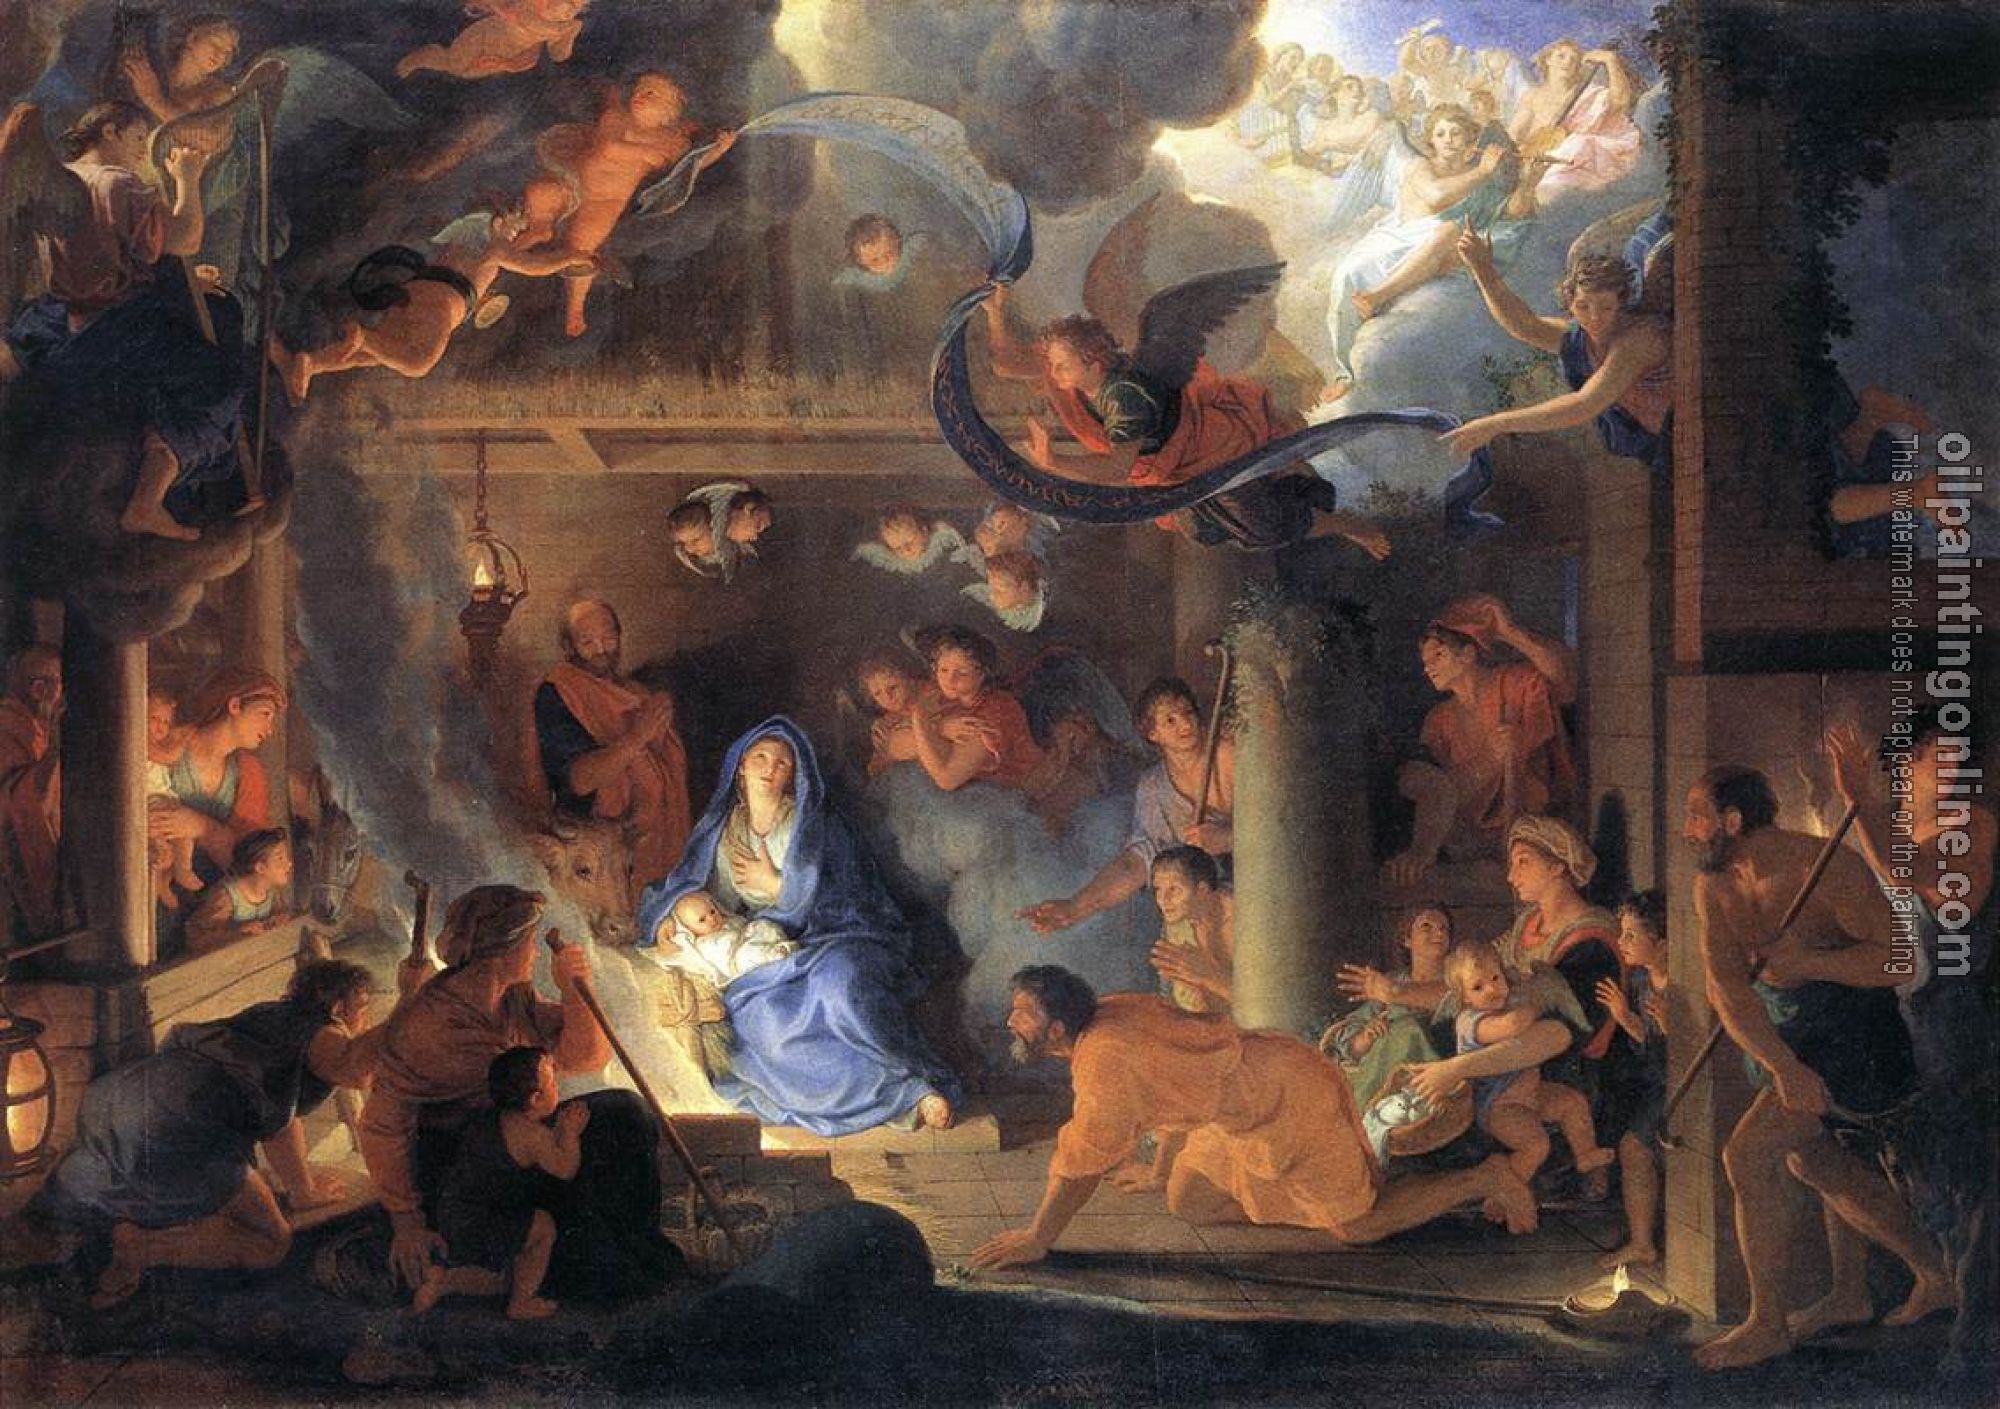 Le Brun, Charles - Adoration of the Shepherds